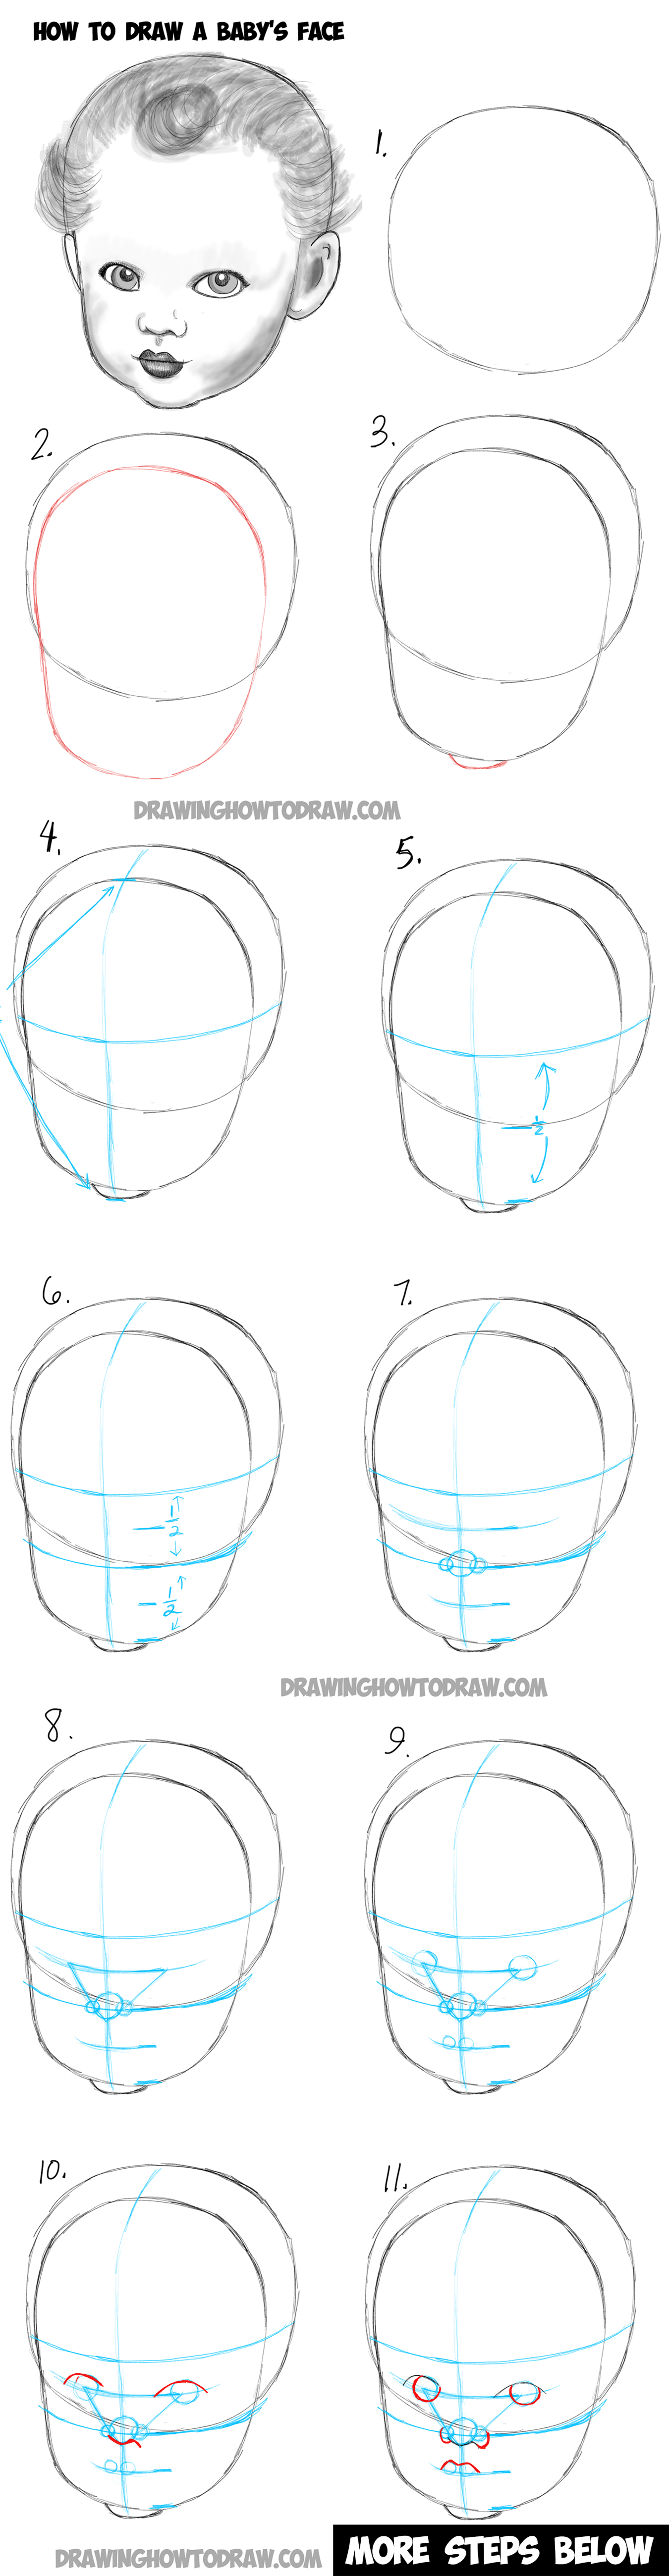 Learn How to Draw a Baby's Face : Drawing Infant Faces with Step by Step Drawing Tutorial